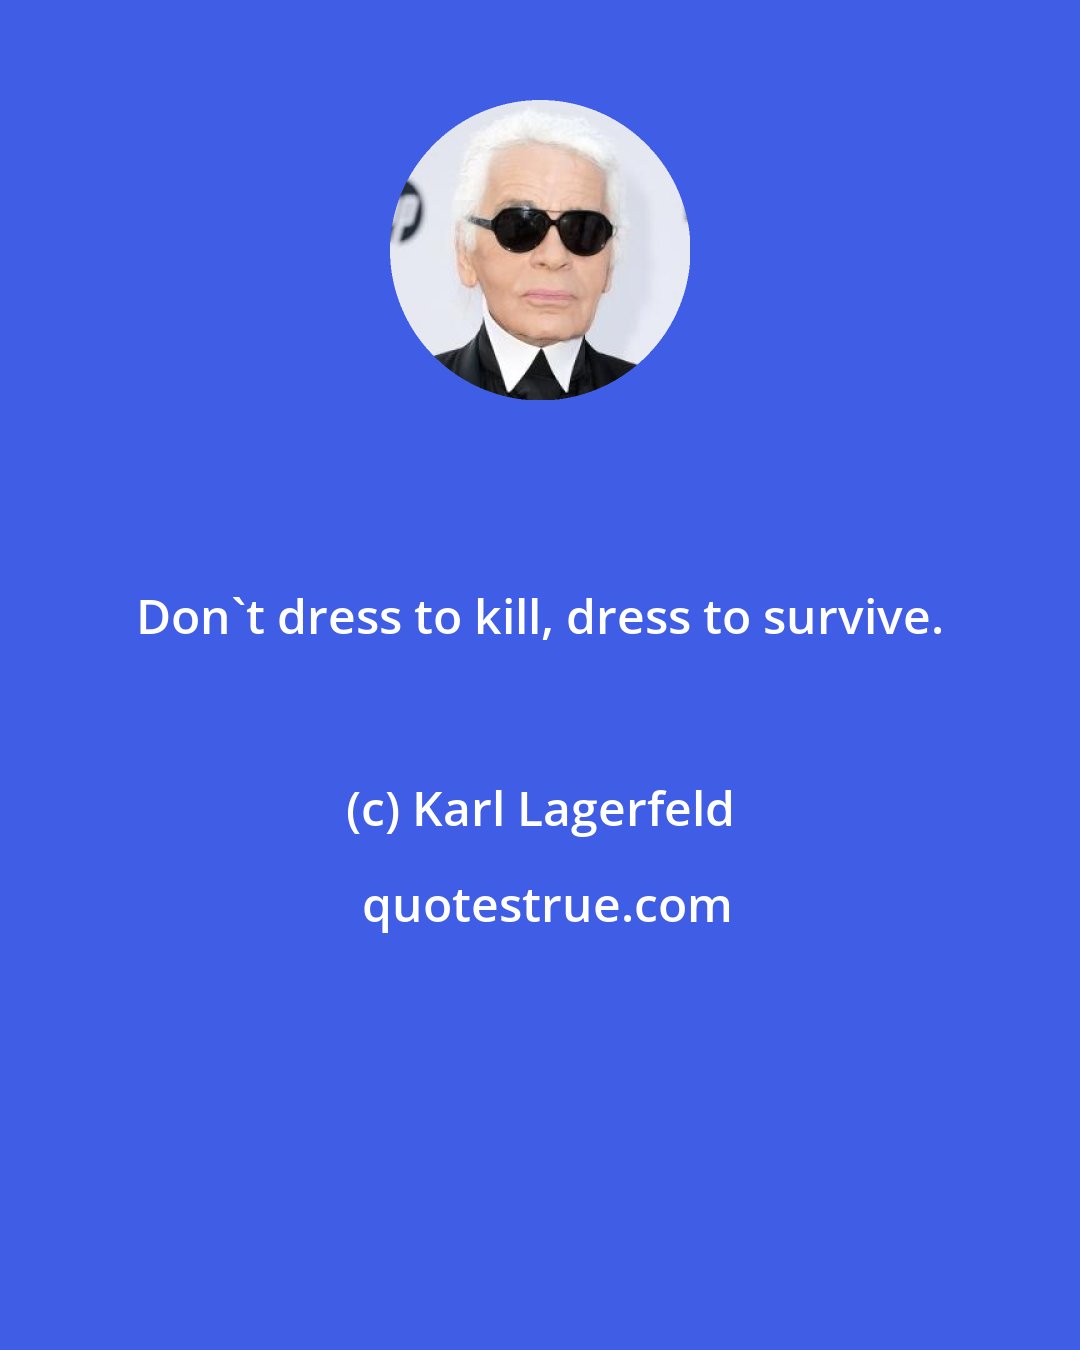 Karl Lagerfeld: Don't dress to kill, dress to survive.